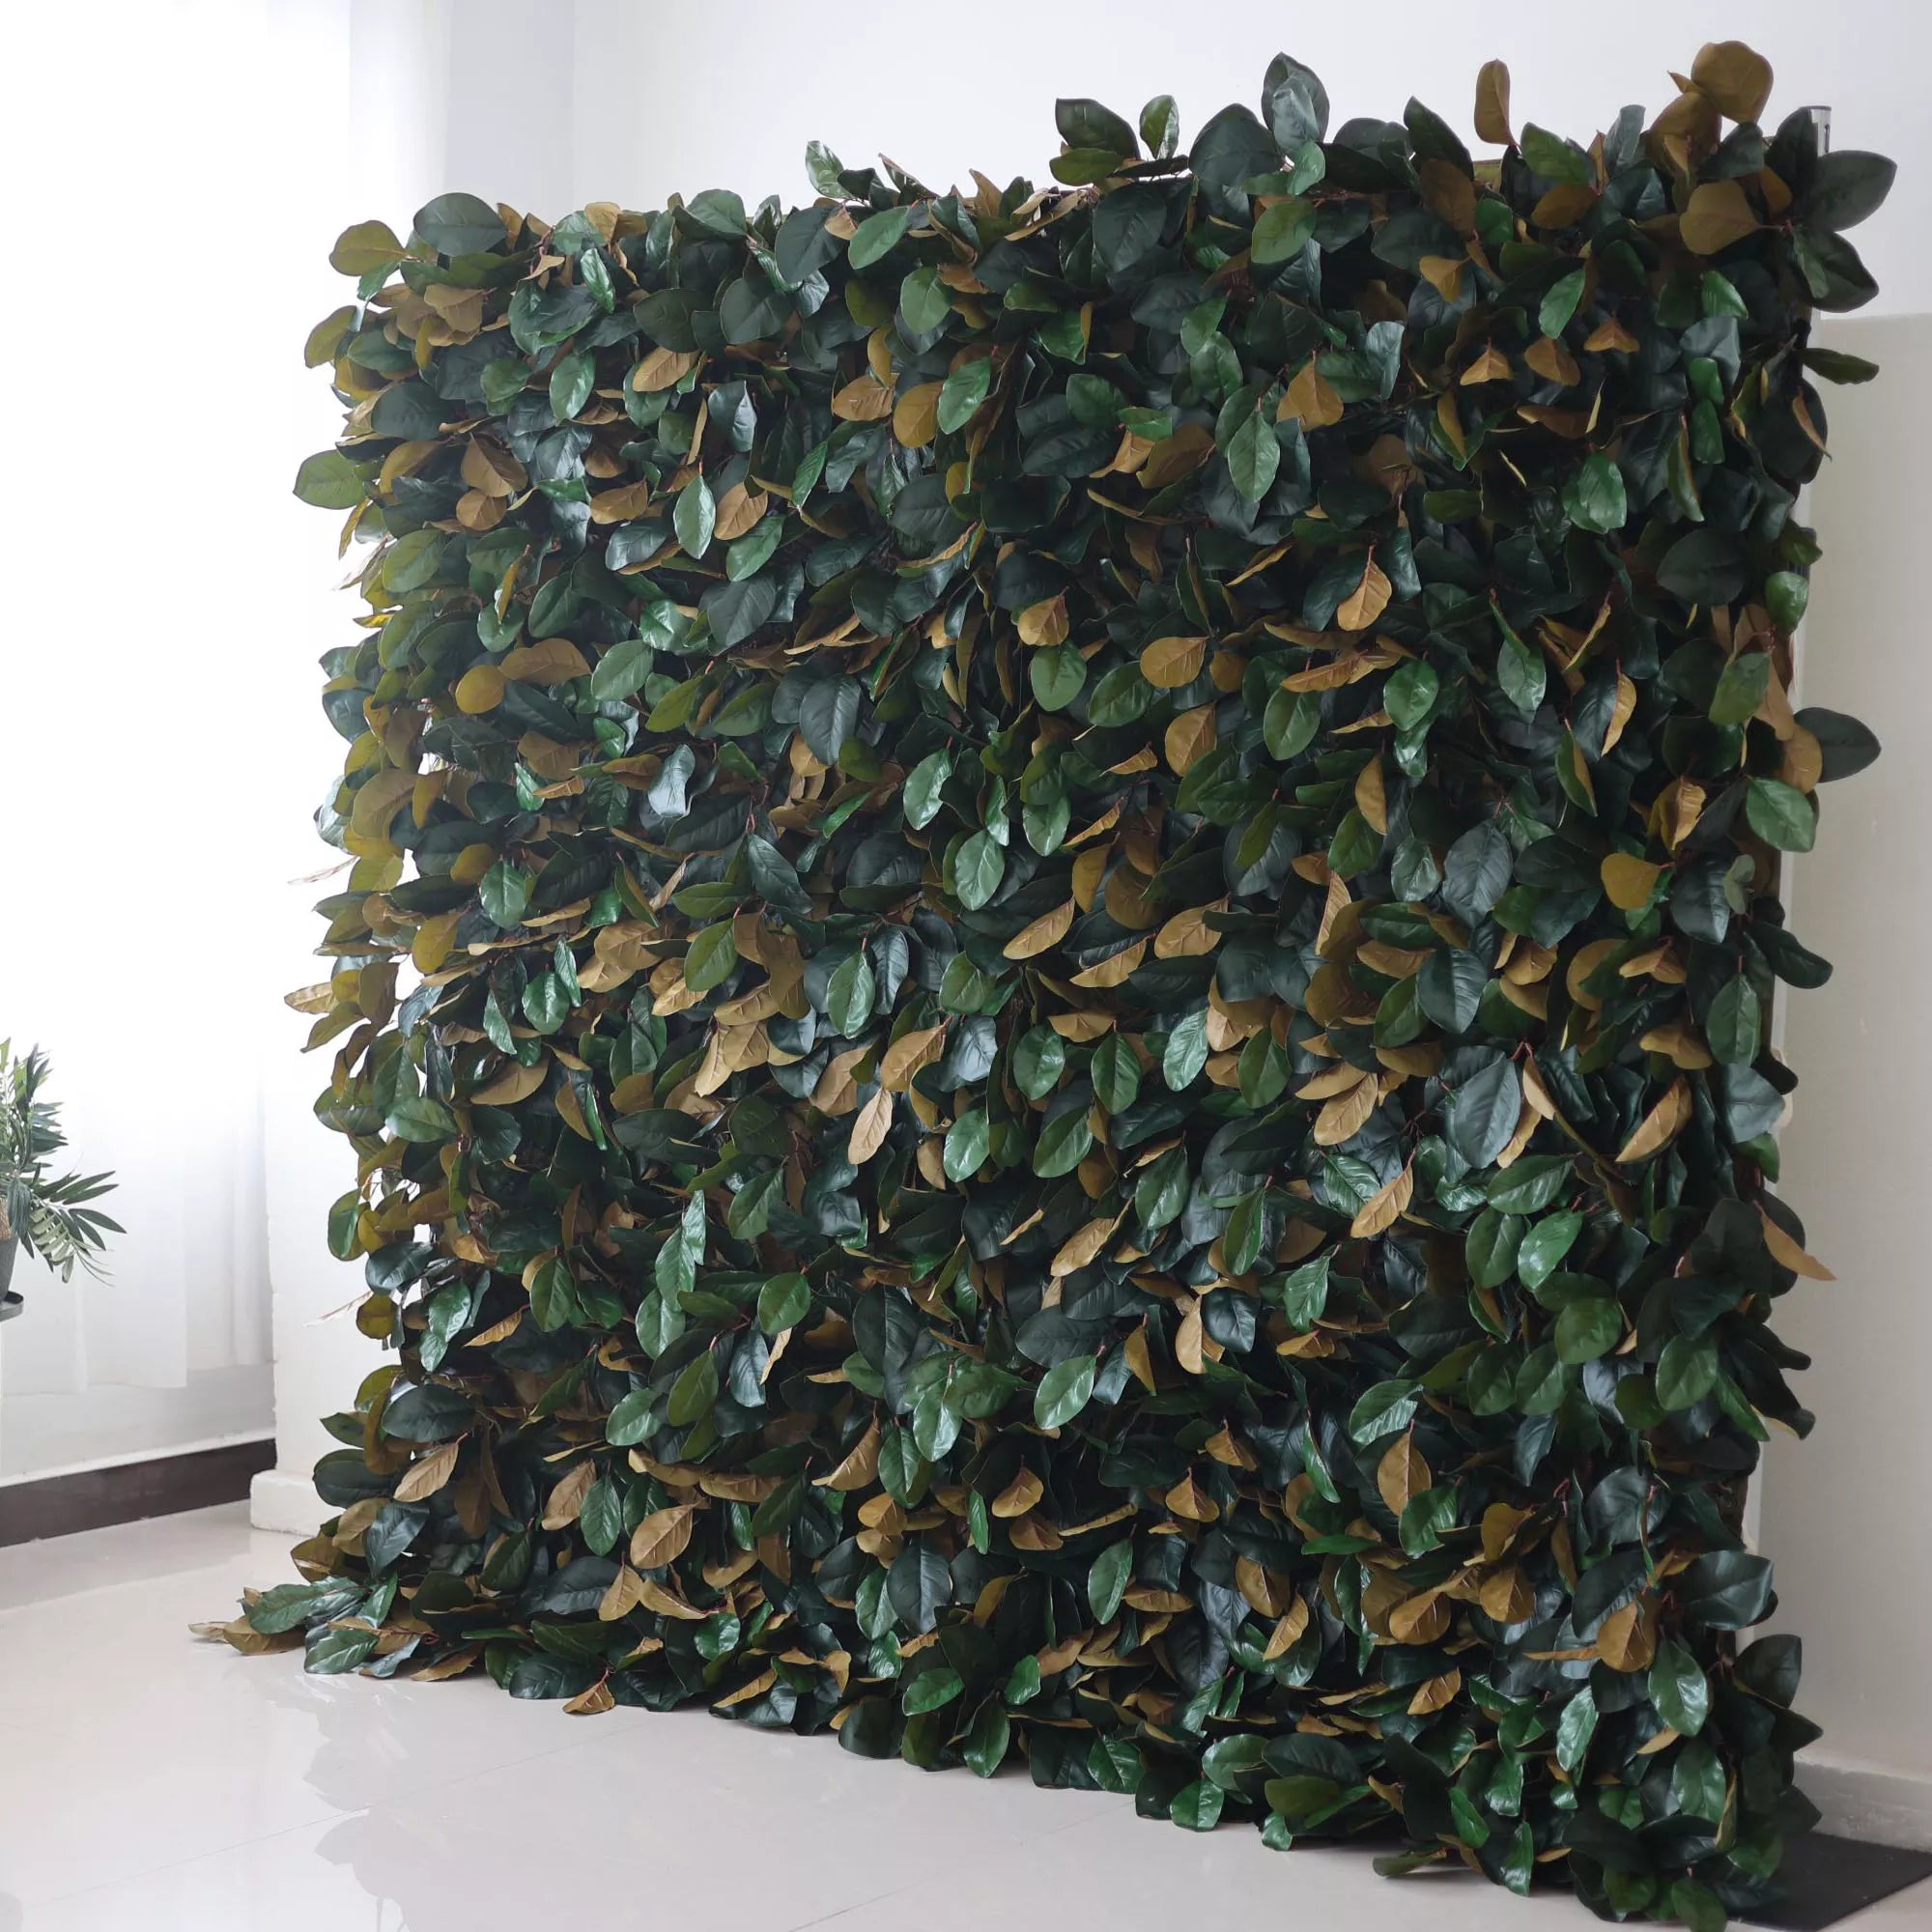 ValarFlowers Backdrop: An intricate play of green and gold leaves, capturing nature's serenity. Ideal for creating a tranquil, eco-friendly setting.